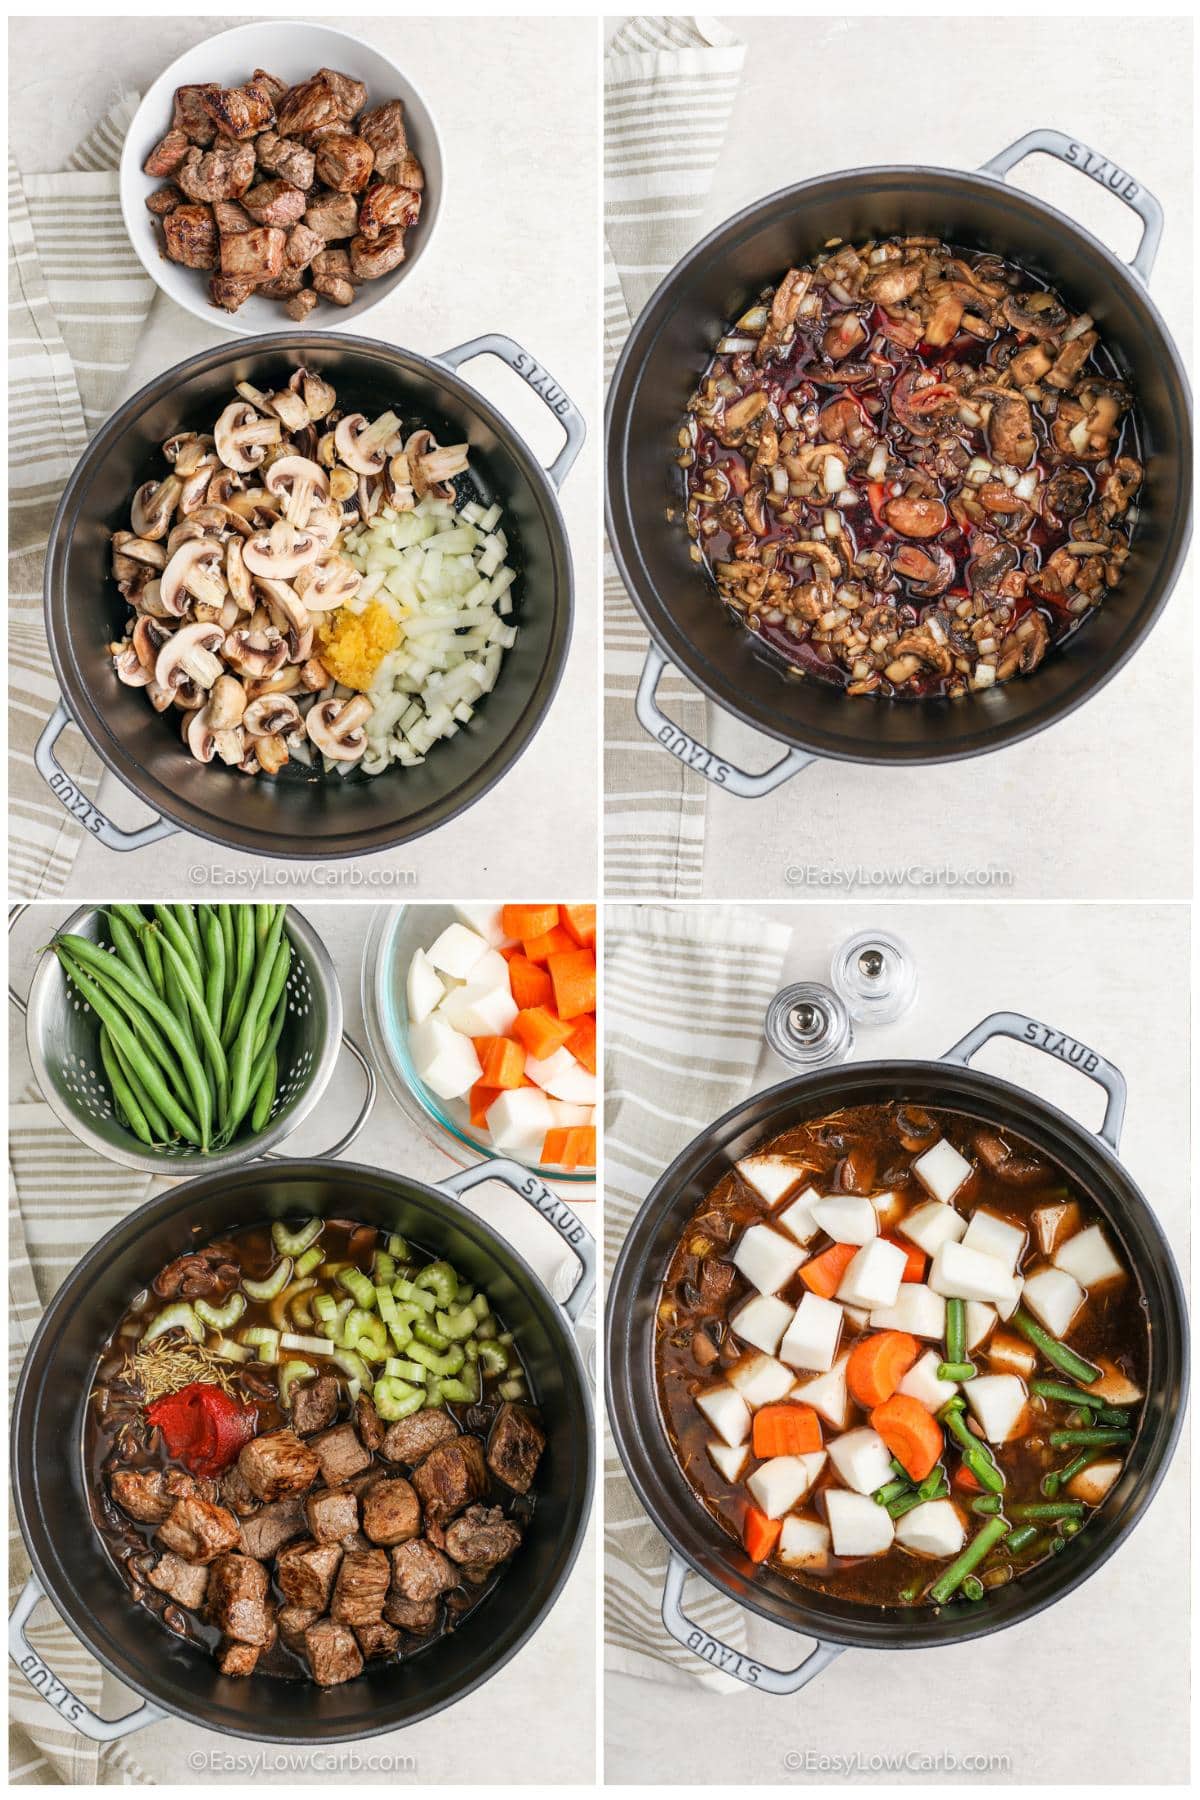 process of adding ingredients together to make Low Carb Beef Stew